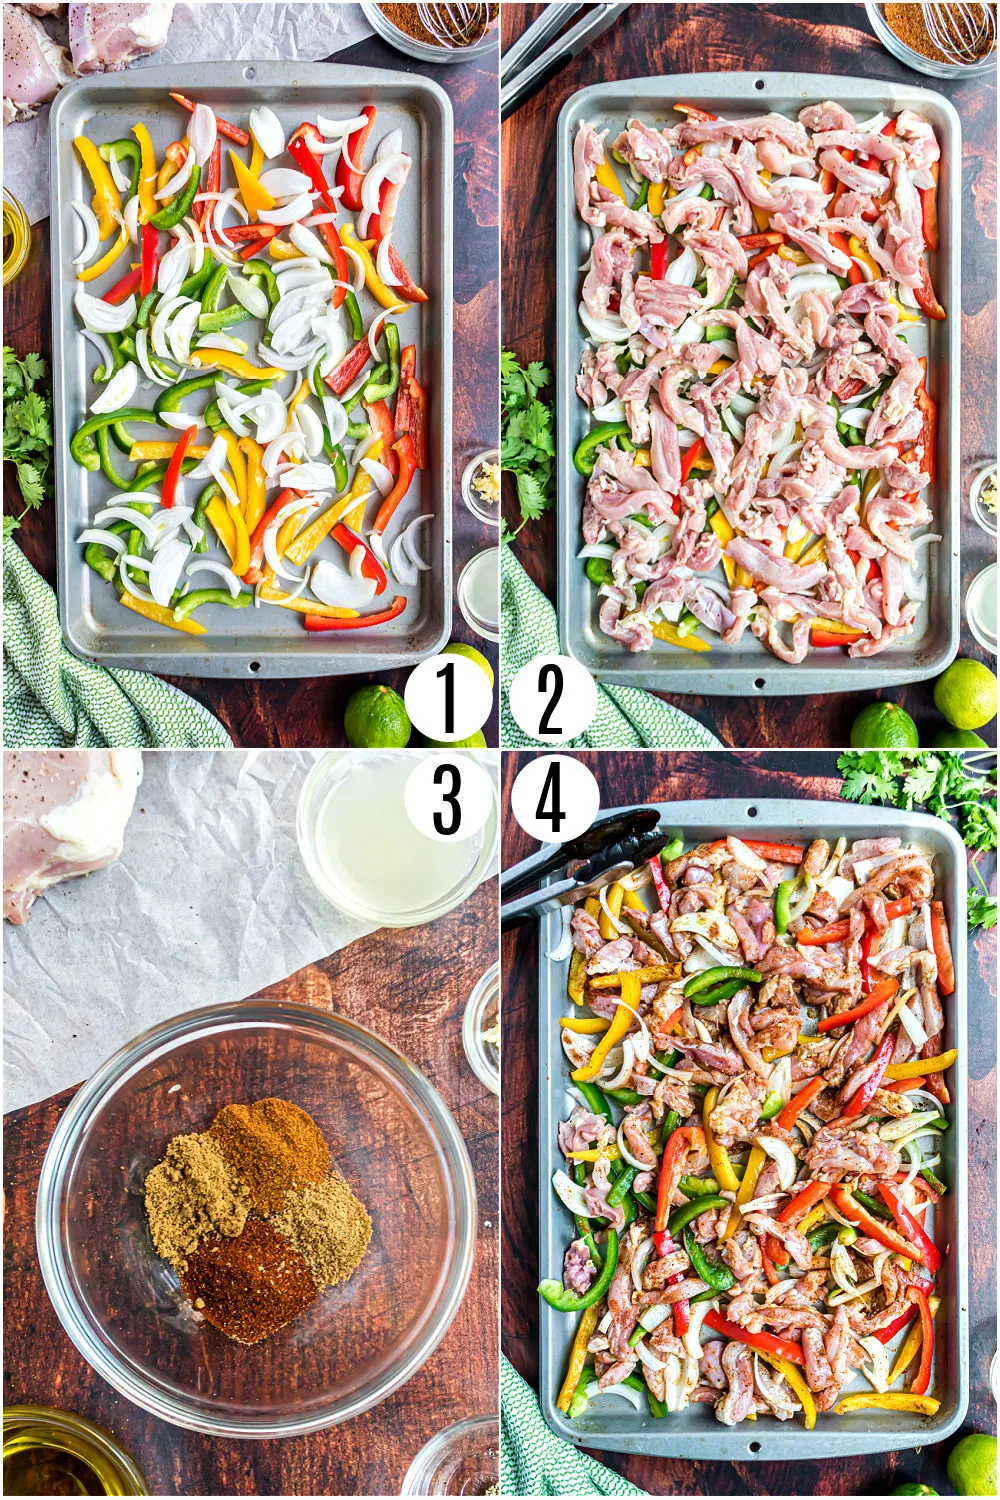 Step by step photos showing how to make sheet pan chicken fajitas.